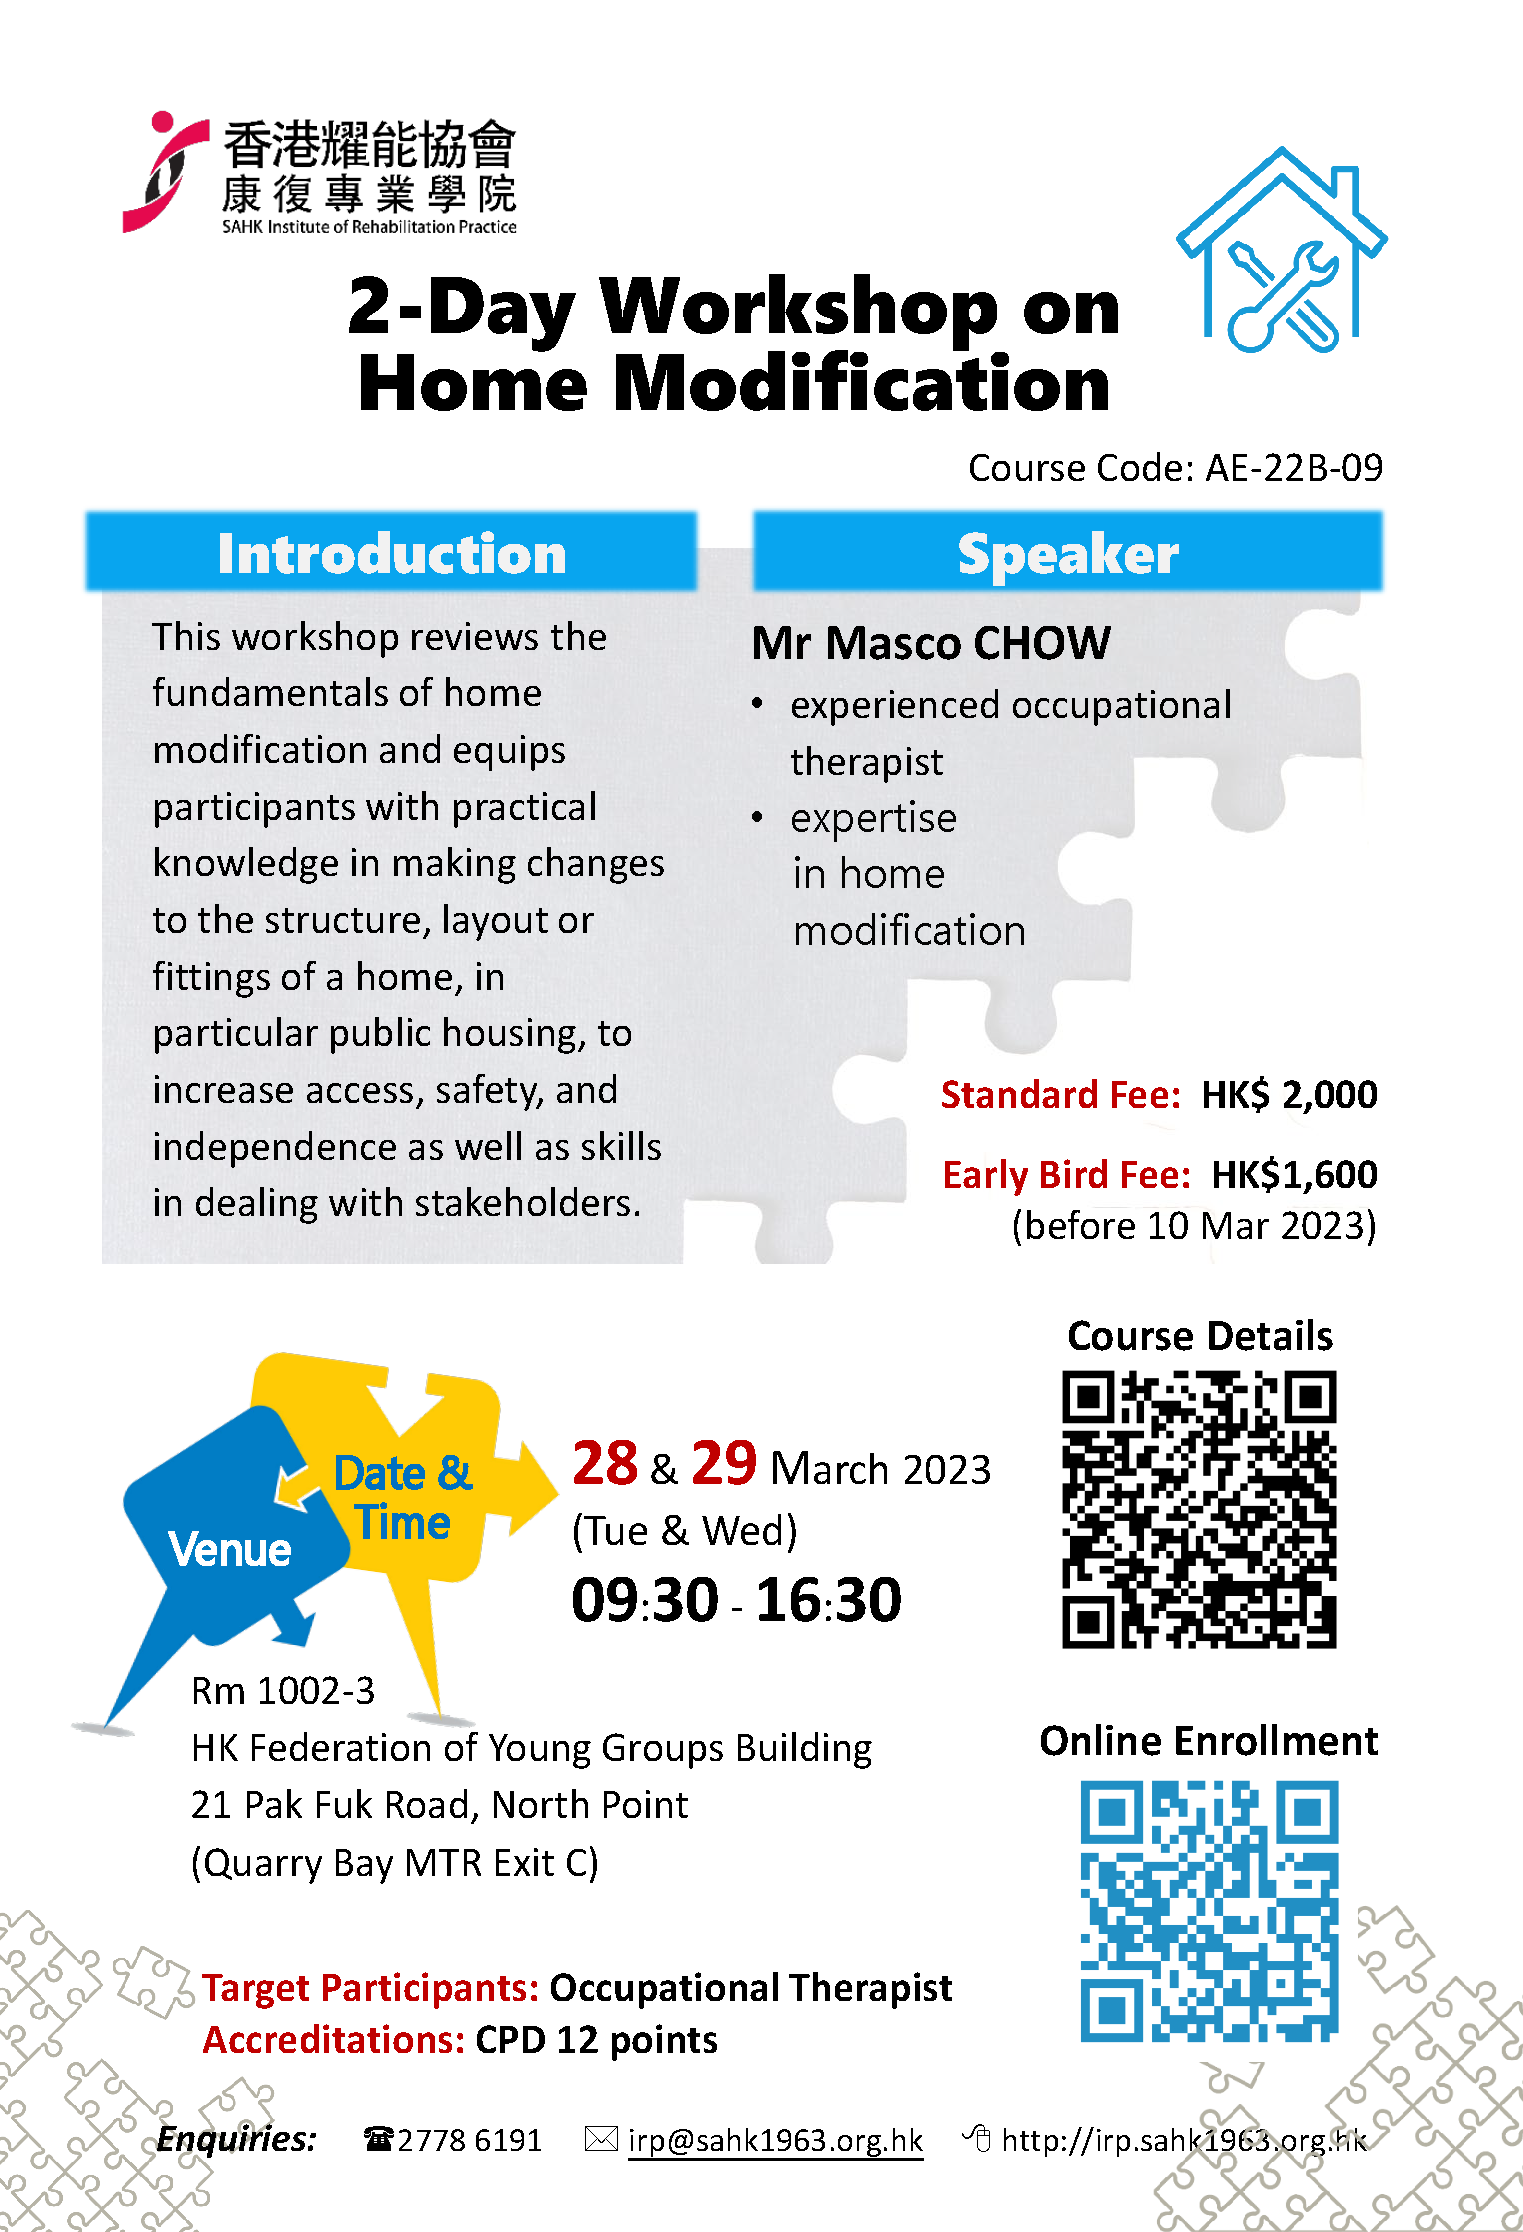 2-Day Workshop on Home Modification